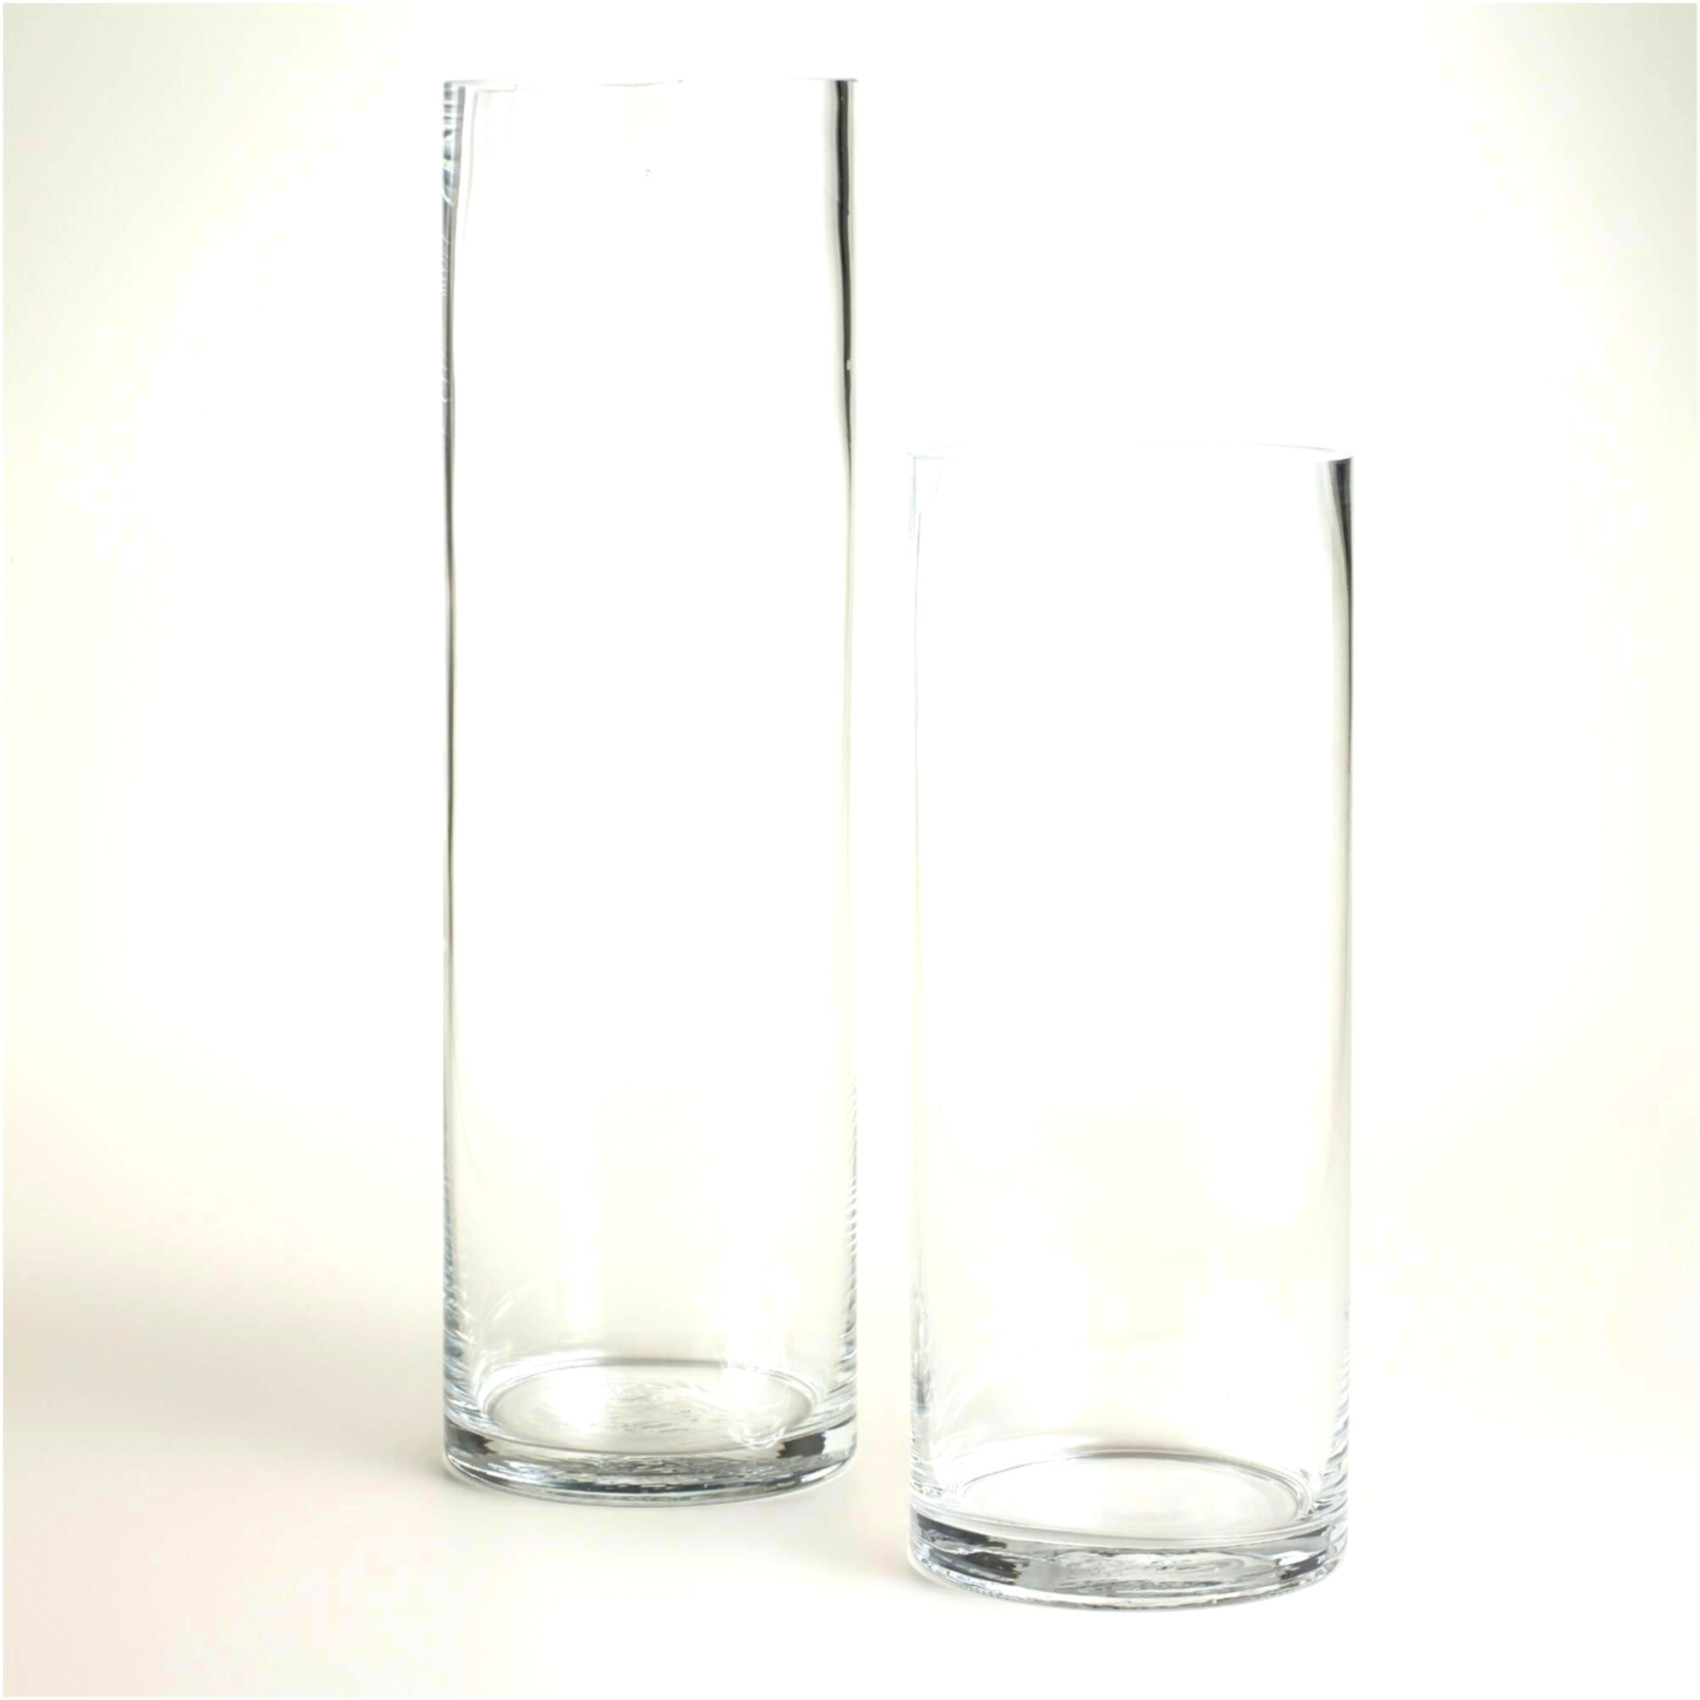 30 Spectacular 12 Inch Cylinder Vases wholesale 2024 free download 12 inch cylinder vases wholesale of why you should not go to glass vases wholesale glass vases throughout crystal glass vases wholesale inspirational 30 elegant vases with